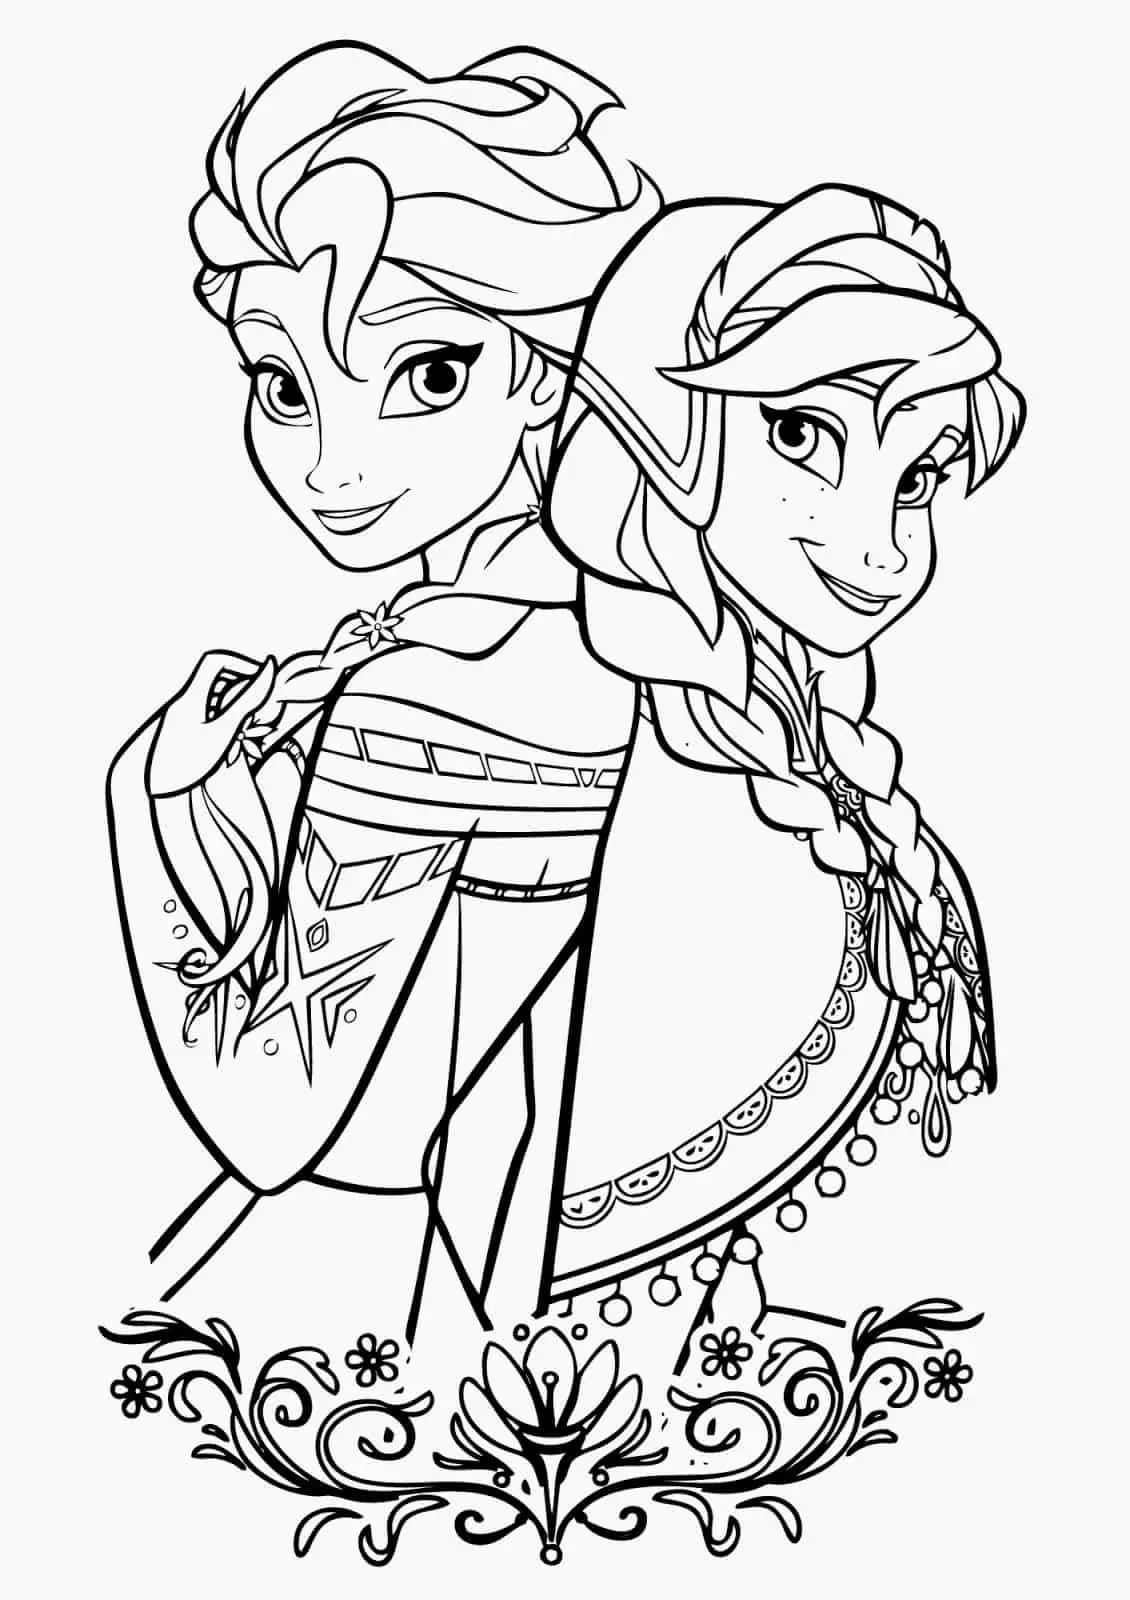 Elsa Coloring Pages (Free and Printable) | Featured